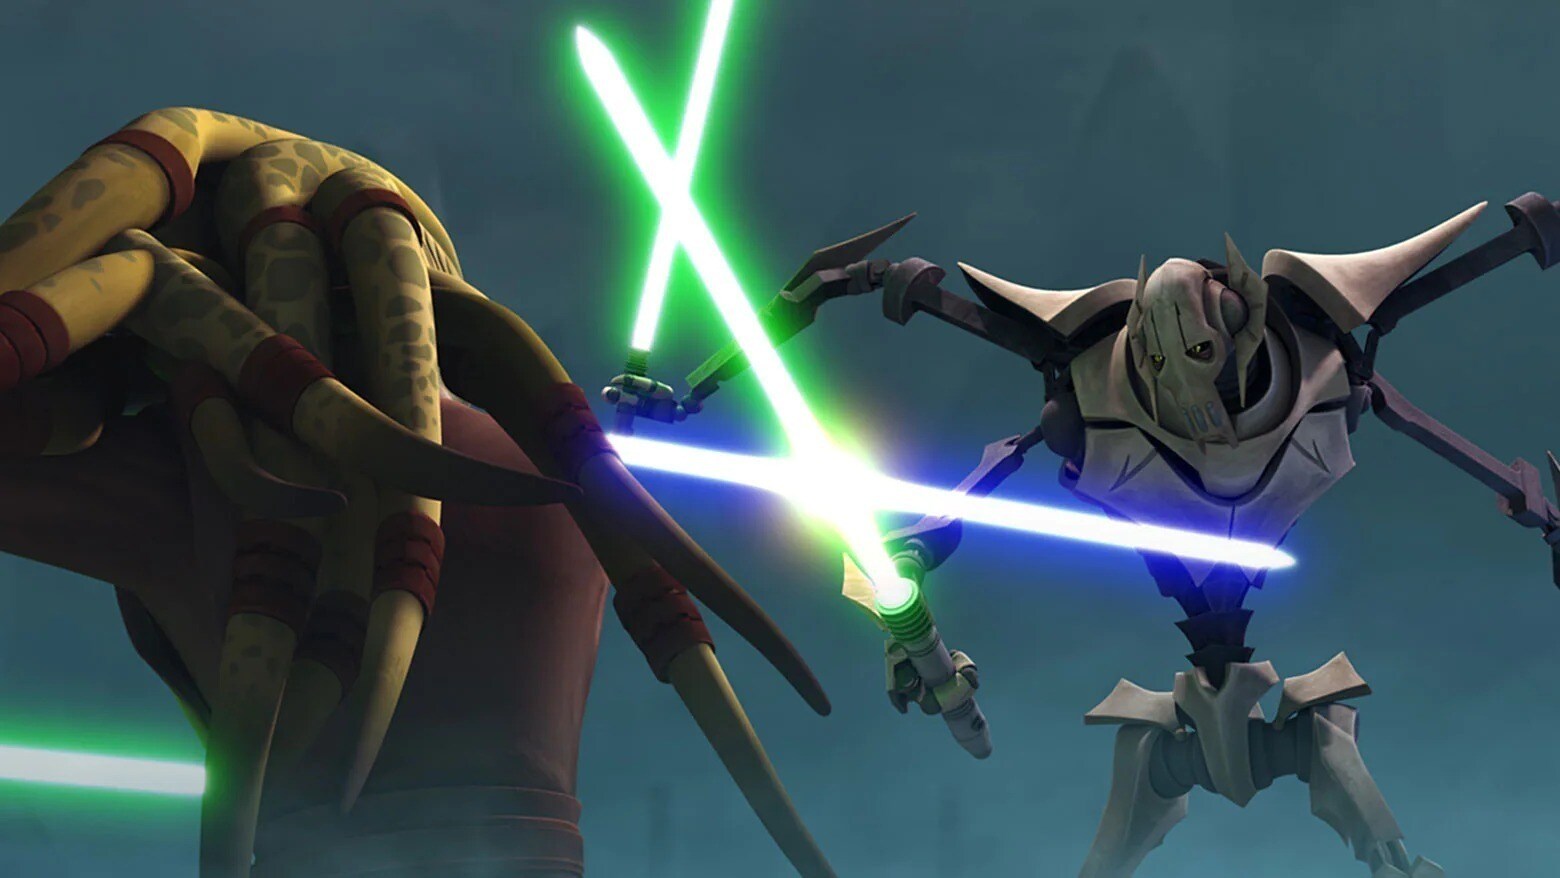 General Grievous fights Kit Fisto